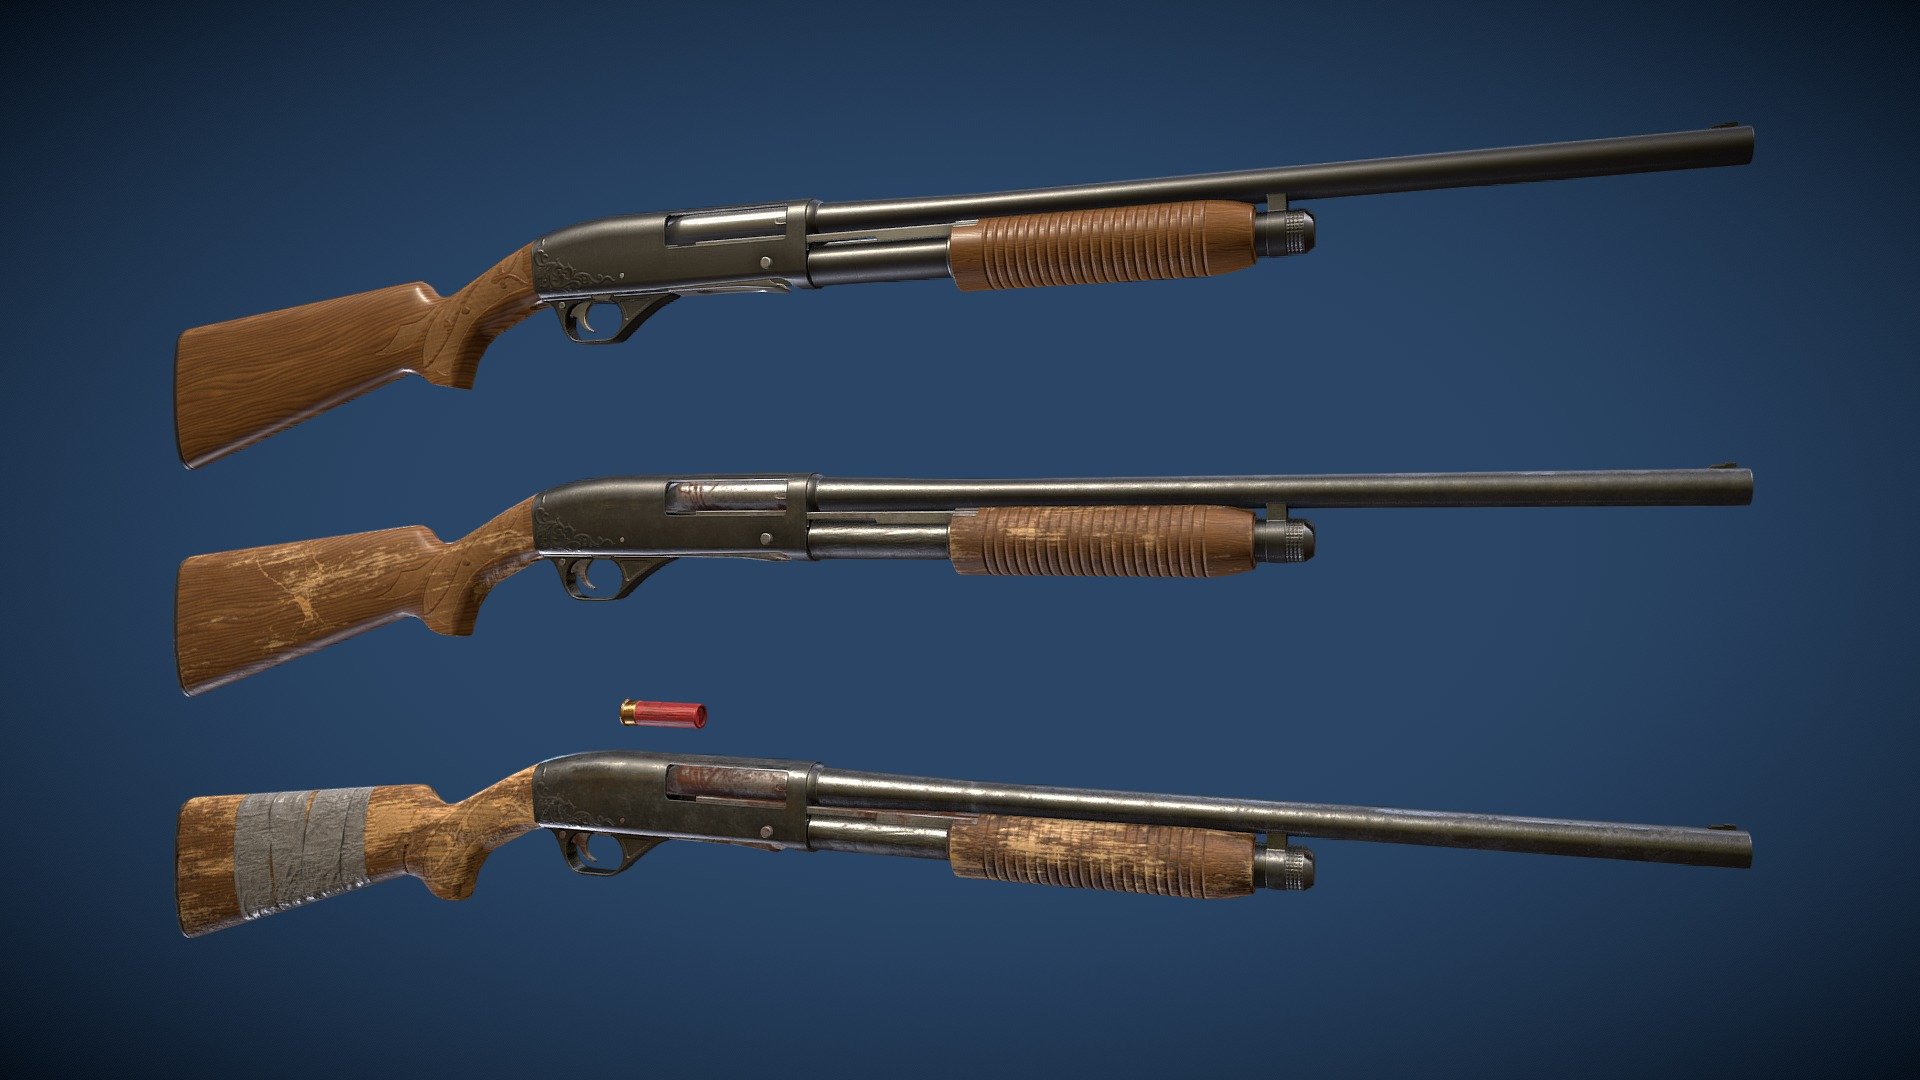 Renders: https://www.artstation.com/artwork/QXLZNL

The Remington Model 31 shotgun model.
This model was made in 3 states: New; Worn; Old. 
The model itself between the states has only a visual difference in textures. The topology of the model is the same in all states.
The shotgun model also has a reload animation.
The model uses 3 PBR textures so far (one pack for each state).

1 Pack:

remington_01_Base Color.png

remington_01_02_ao.jpg

remington_01_Metallic.png

remington_01_Roughness.png

remington_01_Normal.png

2 Pack:

remington_01_02_ao.jpg

remington_02_BaseColor.jpg

remington_02_Metallic.jpg

remington_02_Roughness.jpg

remington_02_Normal.png

3 Pack:

remington_03_ao.jpg

remington_03_BaseColor.jpg

remington_03_Metallic.jpg

remington_03_Roughness.jpg

remington_03_Normal.png

The shotgun model is made in low Poly and has 3.378 vertexes and 6.160 triangles - Shotgun Remington Model 31 in 3 types (Rigged) - Download Free 3D model by Black vizual (@Black_vizual) 3d model